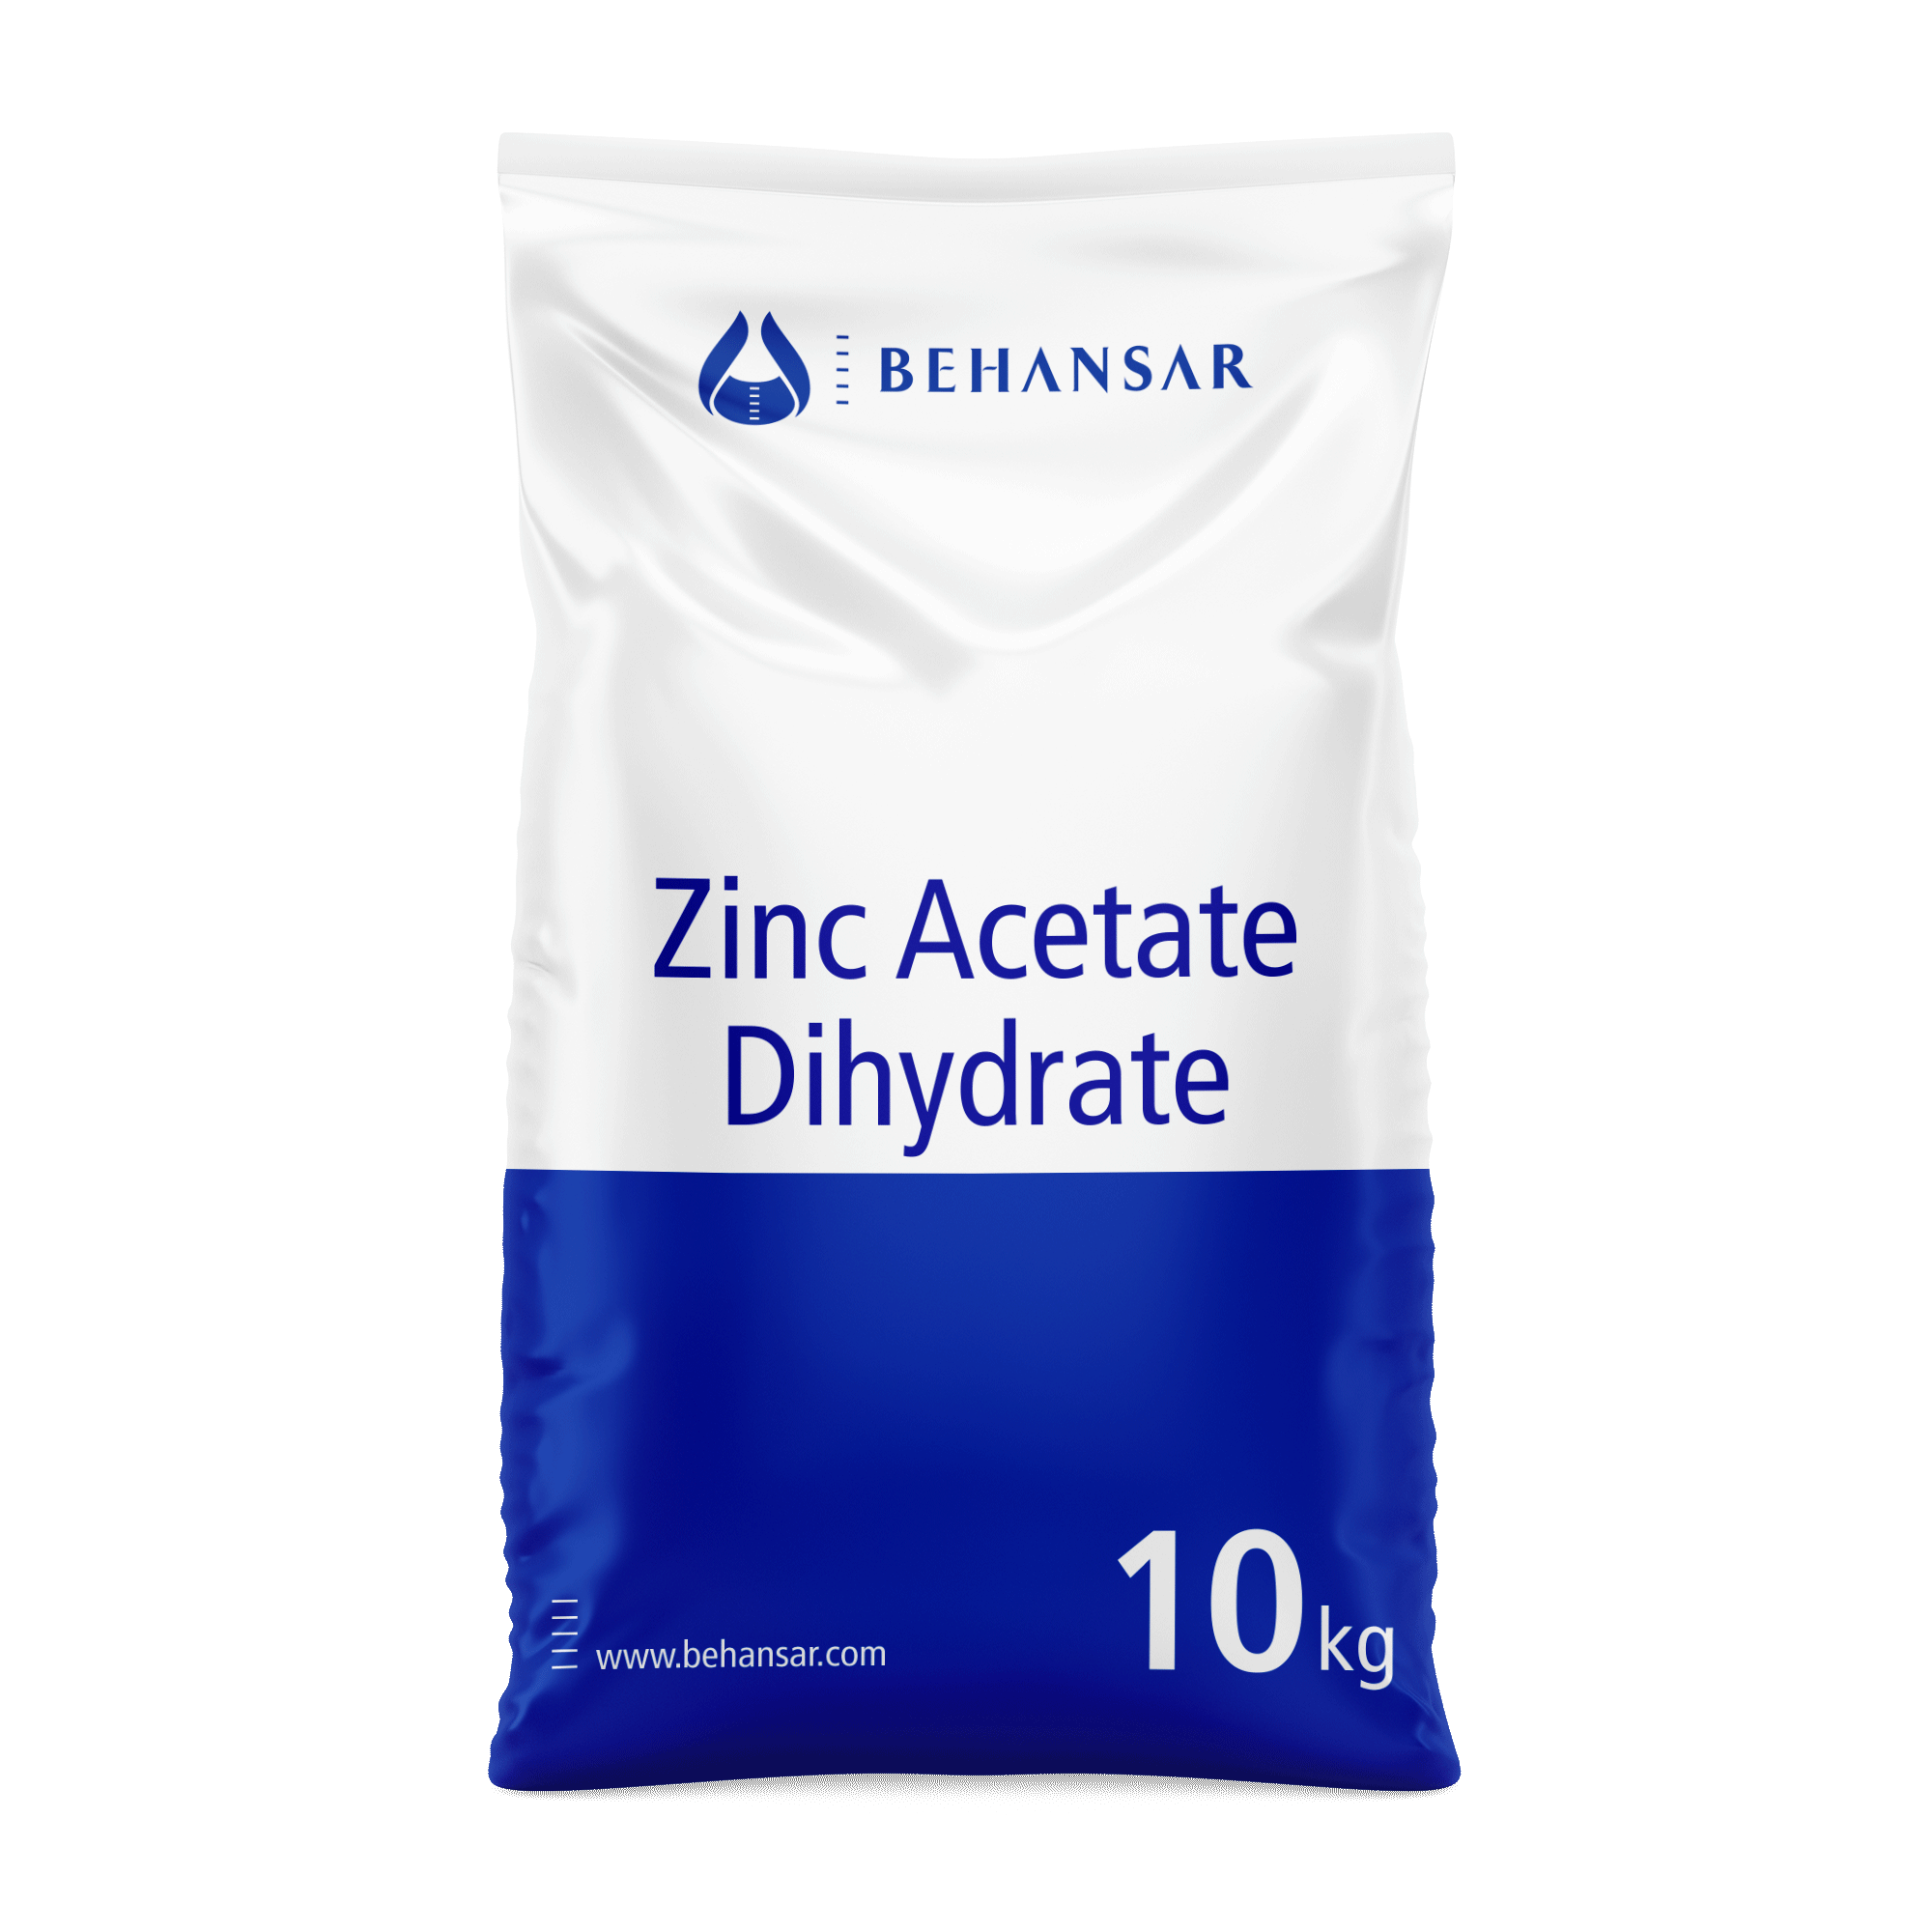 Zinc Acetate Dihydrate is one of the products of Behansar Co